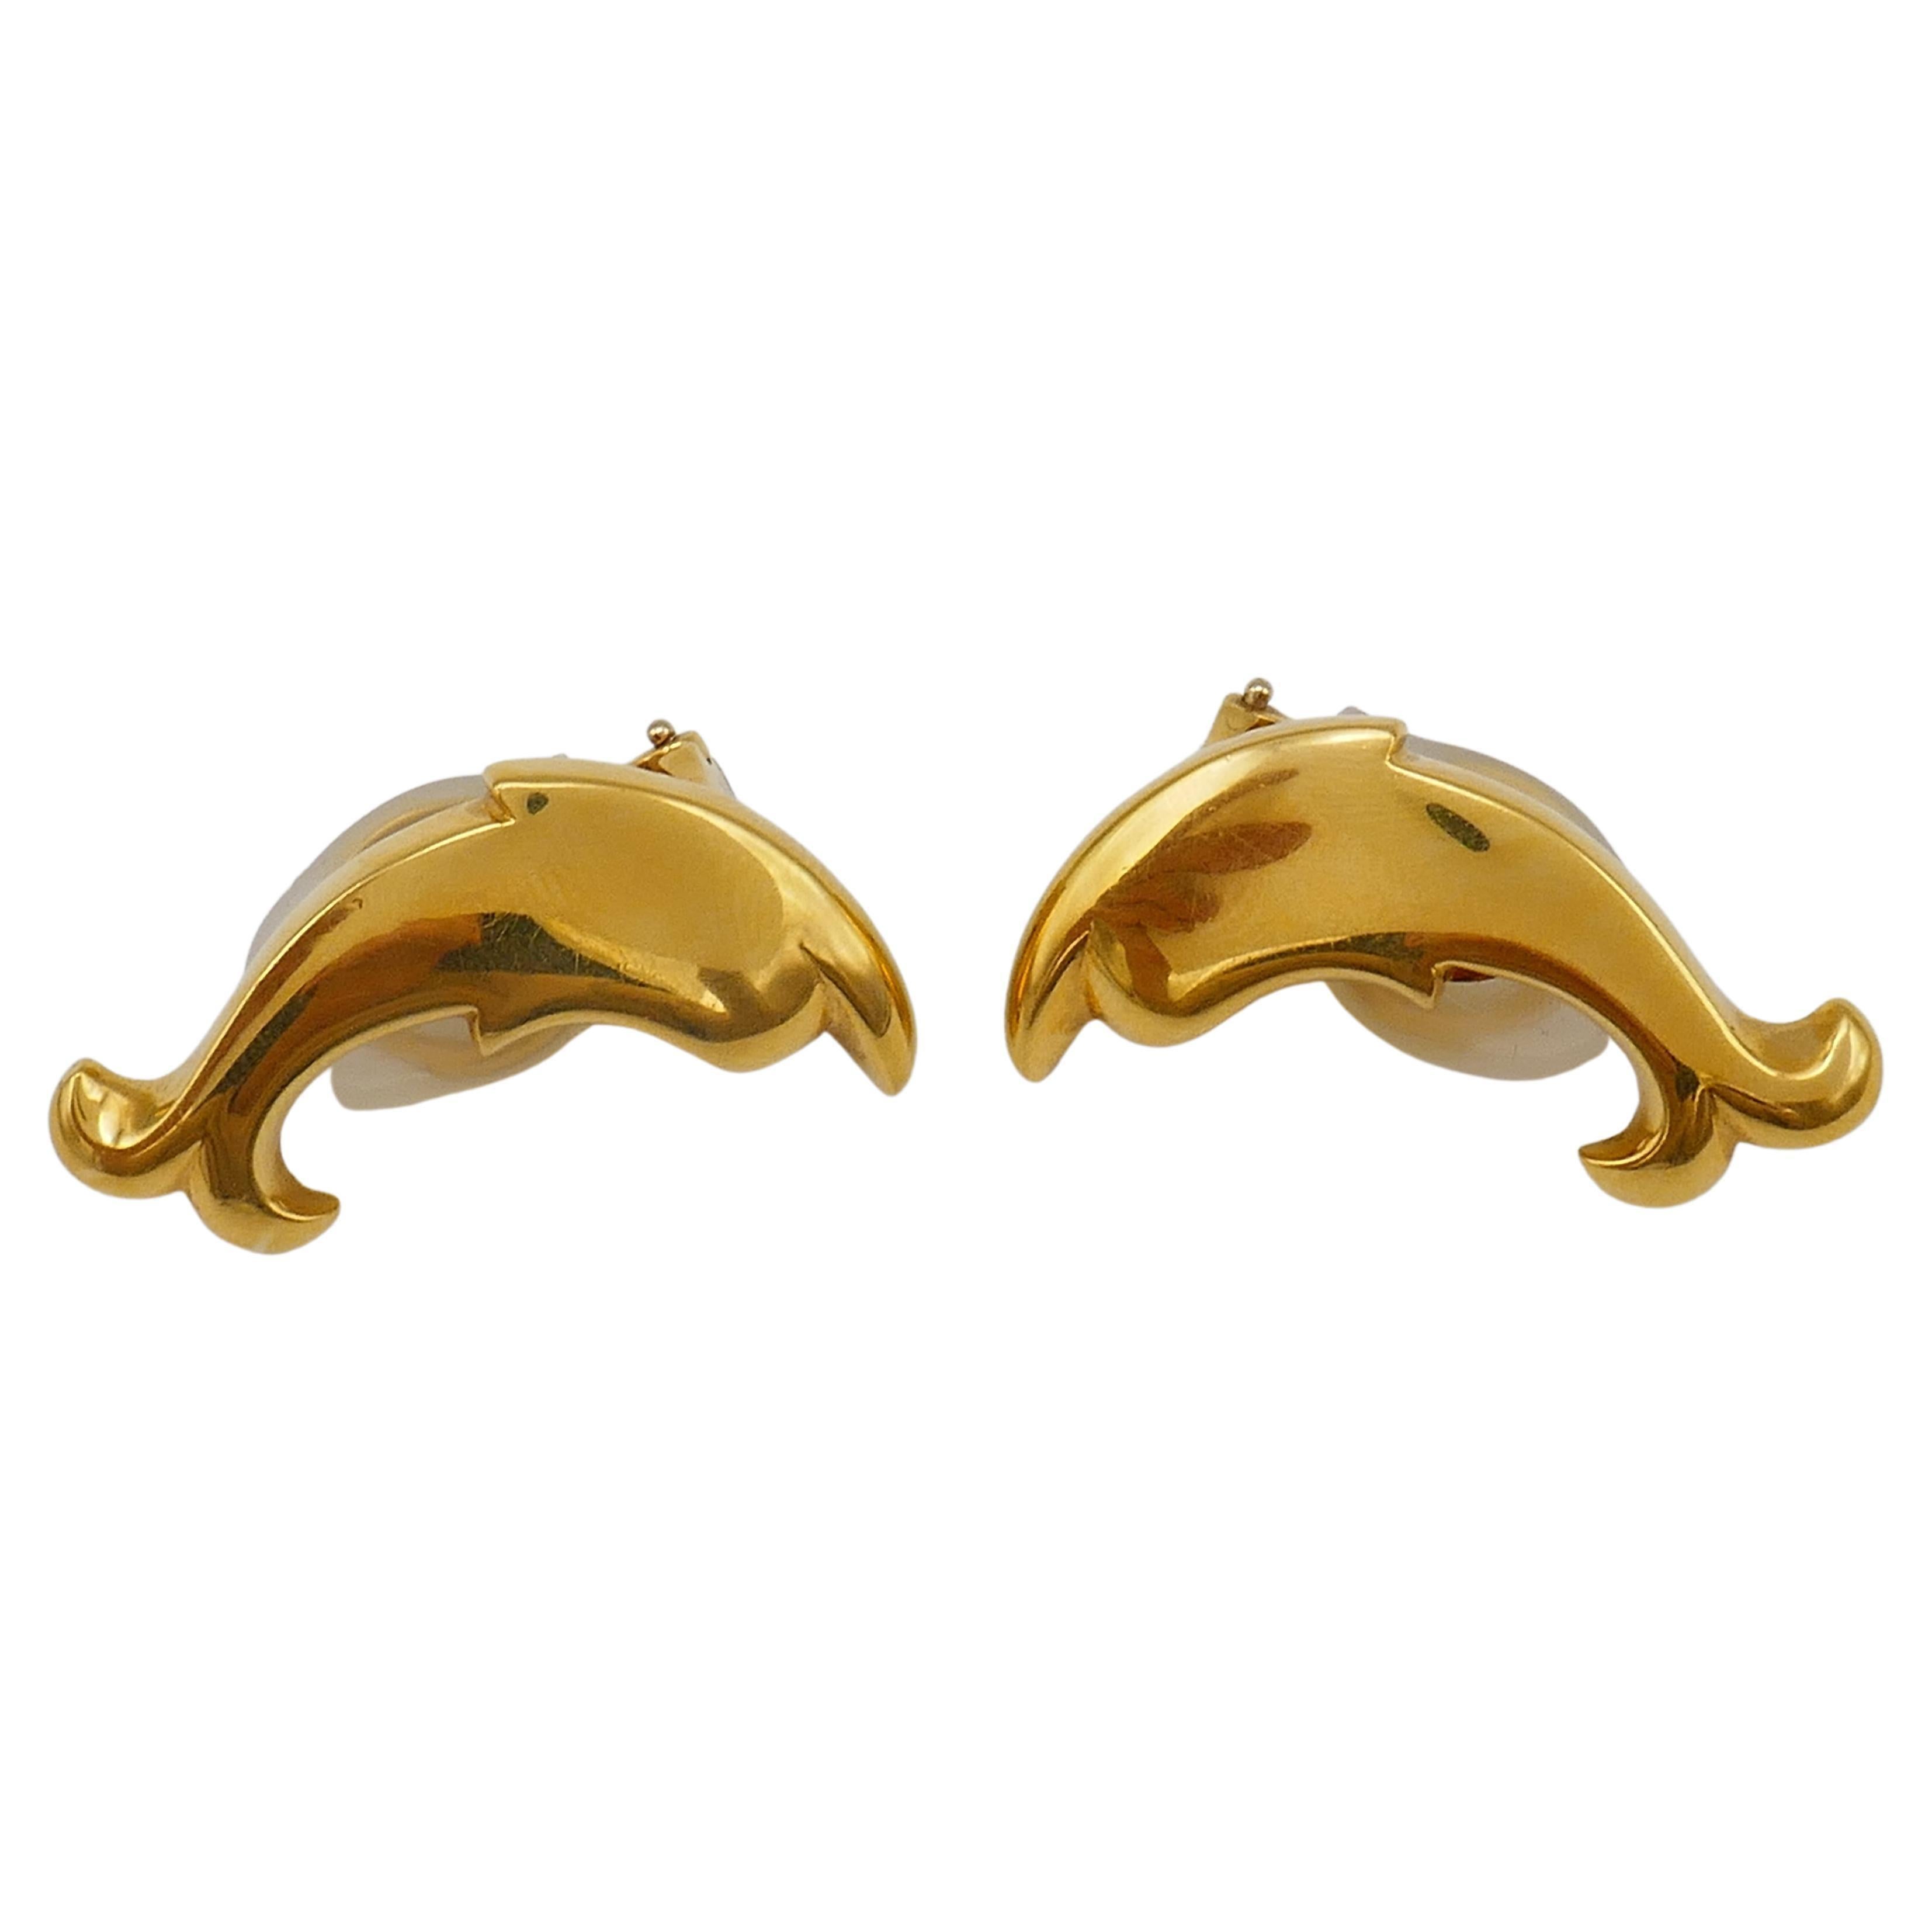 Am amazing vintage Pomellato set consists of a gold brooch and a pair of earrings designed as  swimming dolphin silhouettes. 
Crafted of 18k yellow gold with high-polished finish. 
The earrings are clip-ons, posts can be added.
In jewelry dolphins